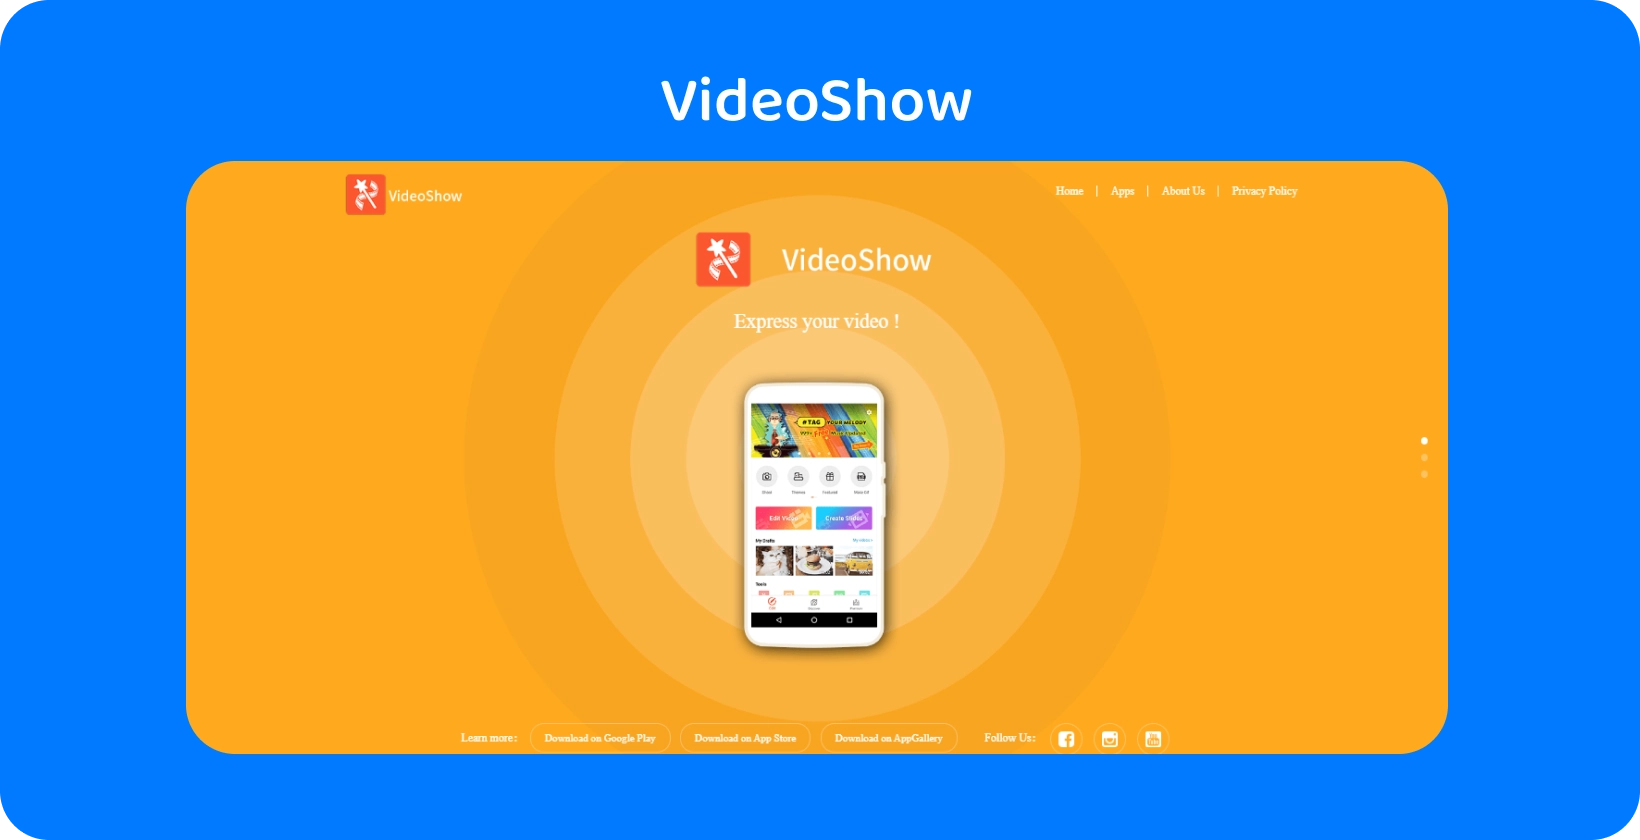 VideoShow app interface on a screen, offering easy video editing tools and features on a vibrant orange background.